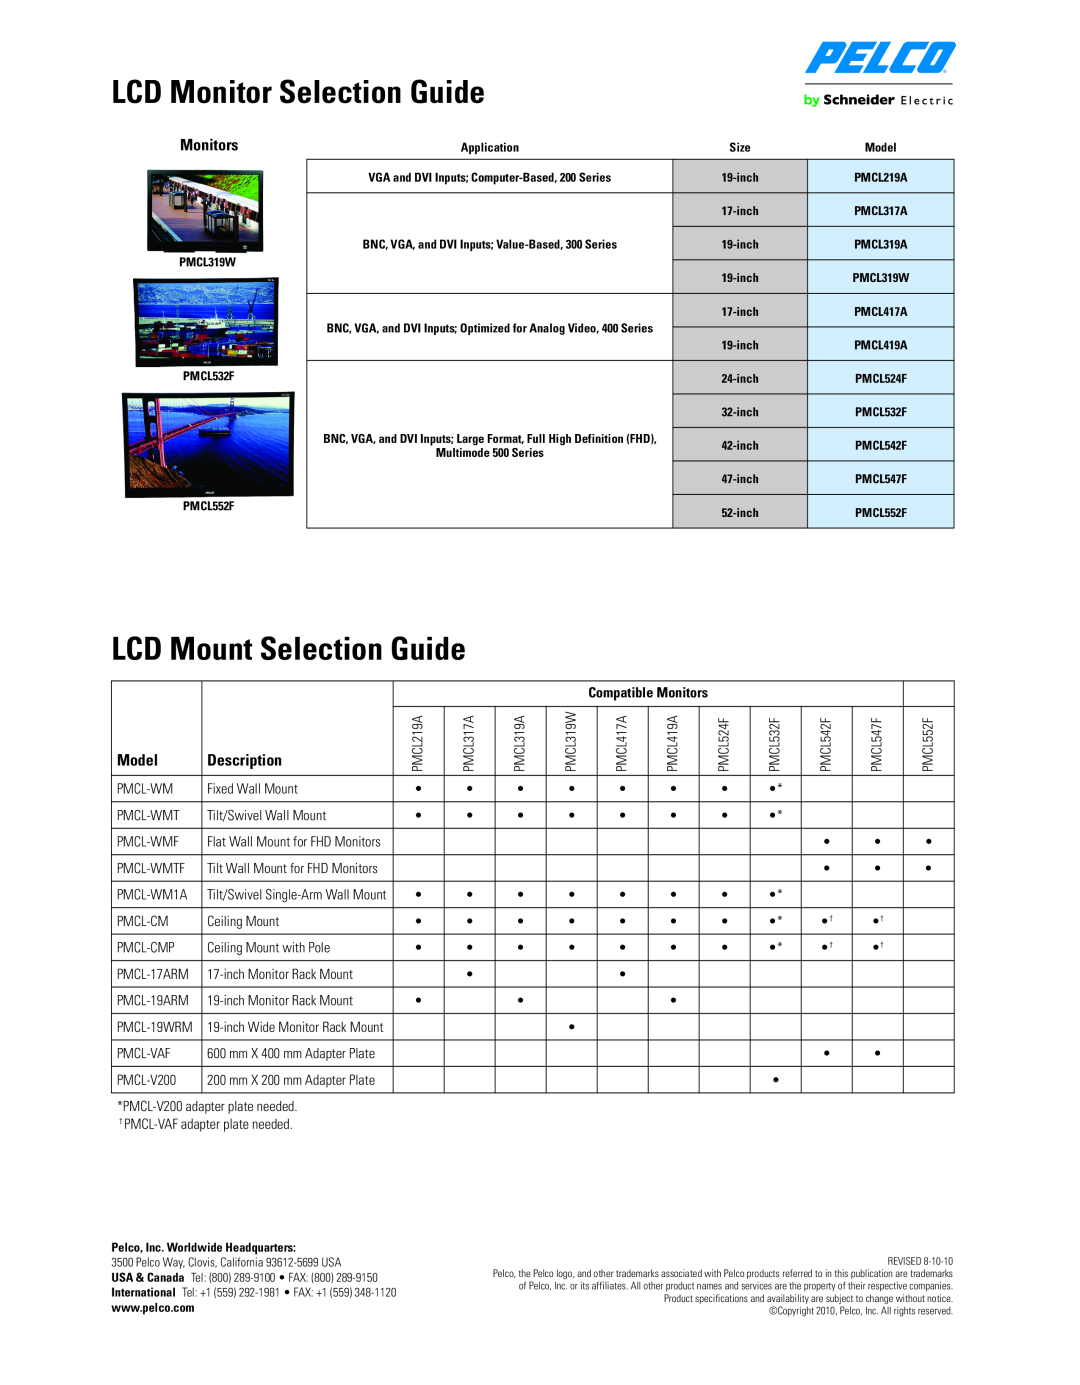 Pelco PMCL317A, PMCL319A specifications LCD Monitor Selection Guide, LCD Mount Selection Guide, Model, Description 